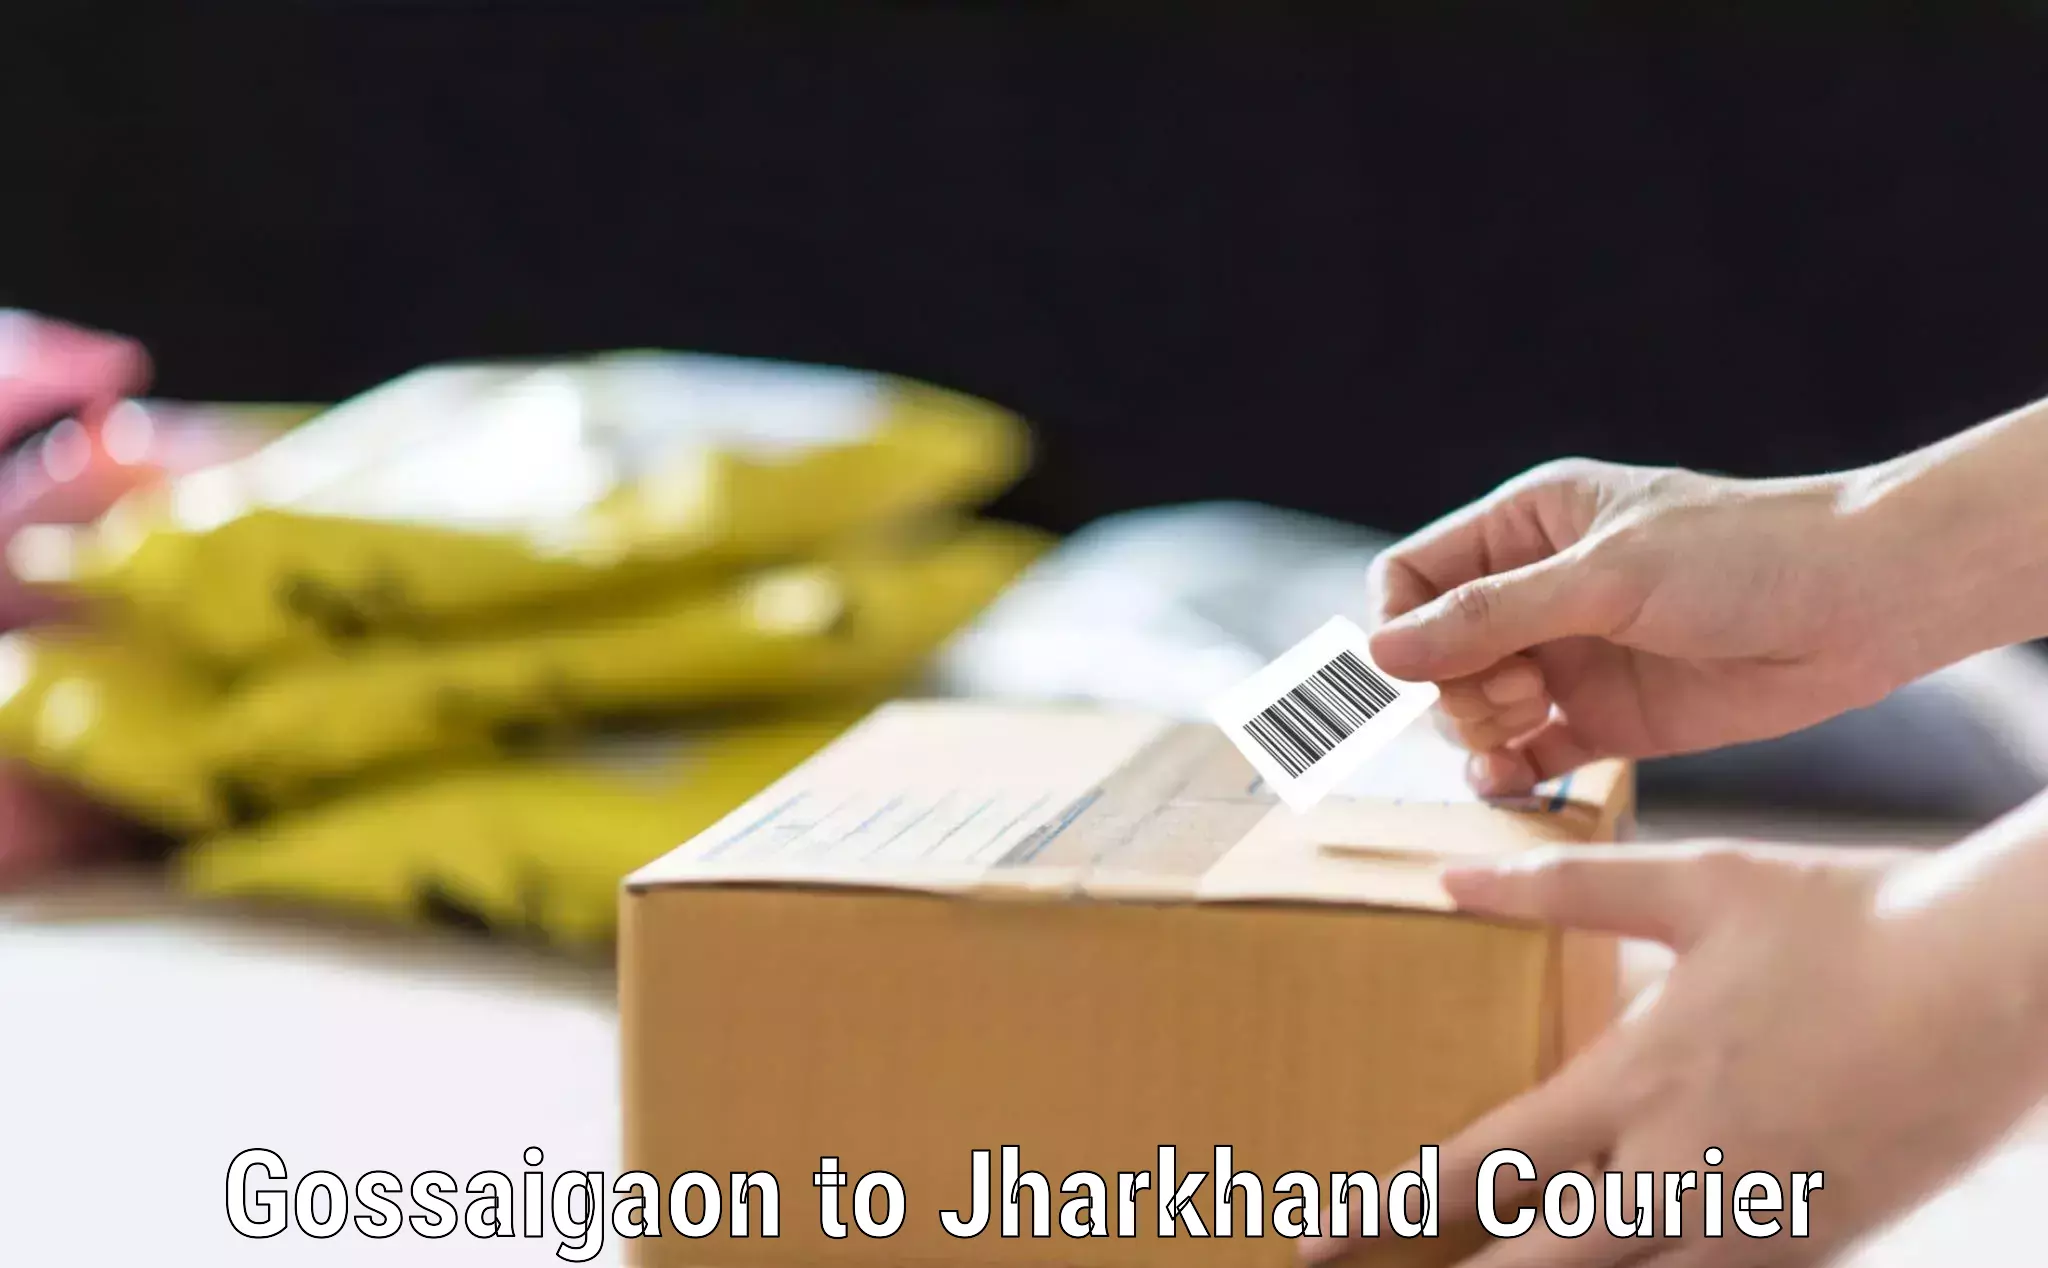 Hassle-free luggage shipping Gossaigaon to Jharkhand